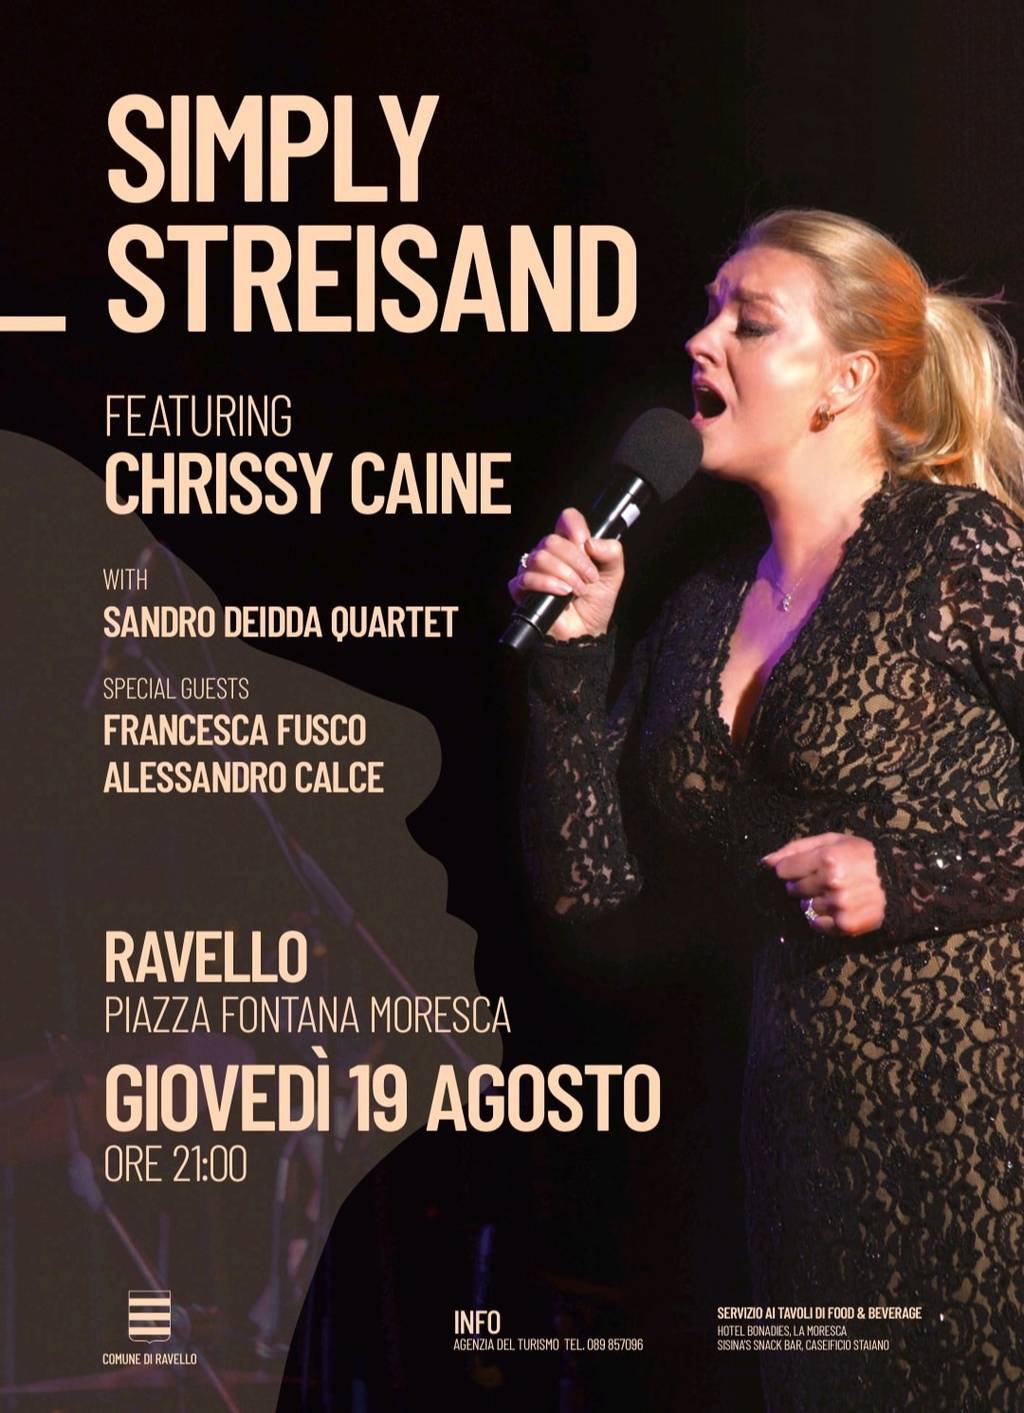 Simply Streisand feat. Chrissy Caine